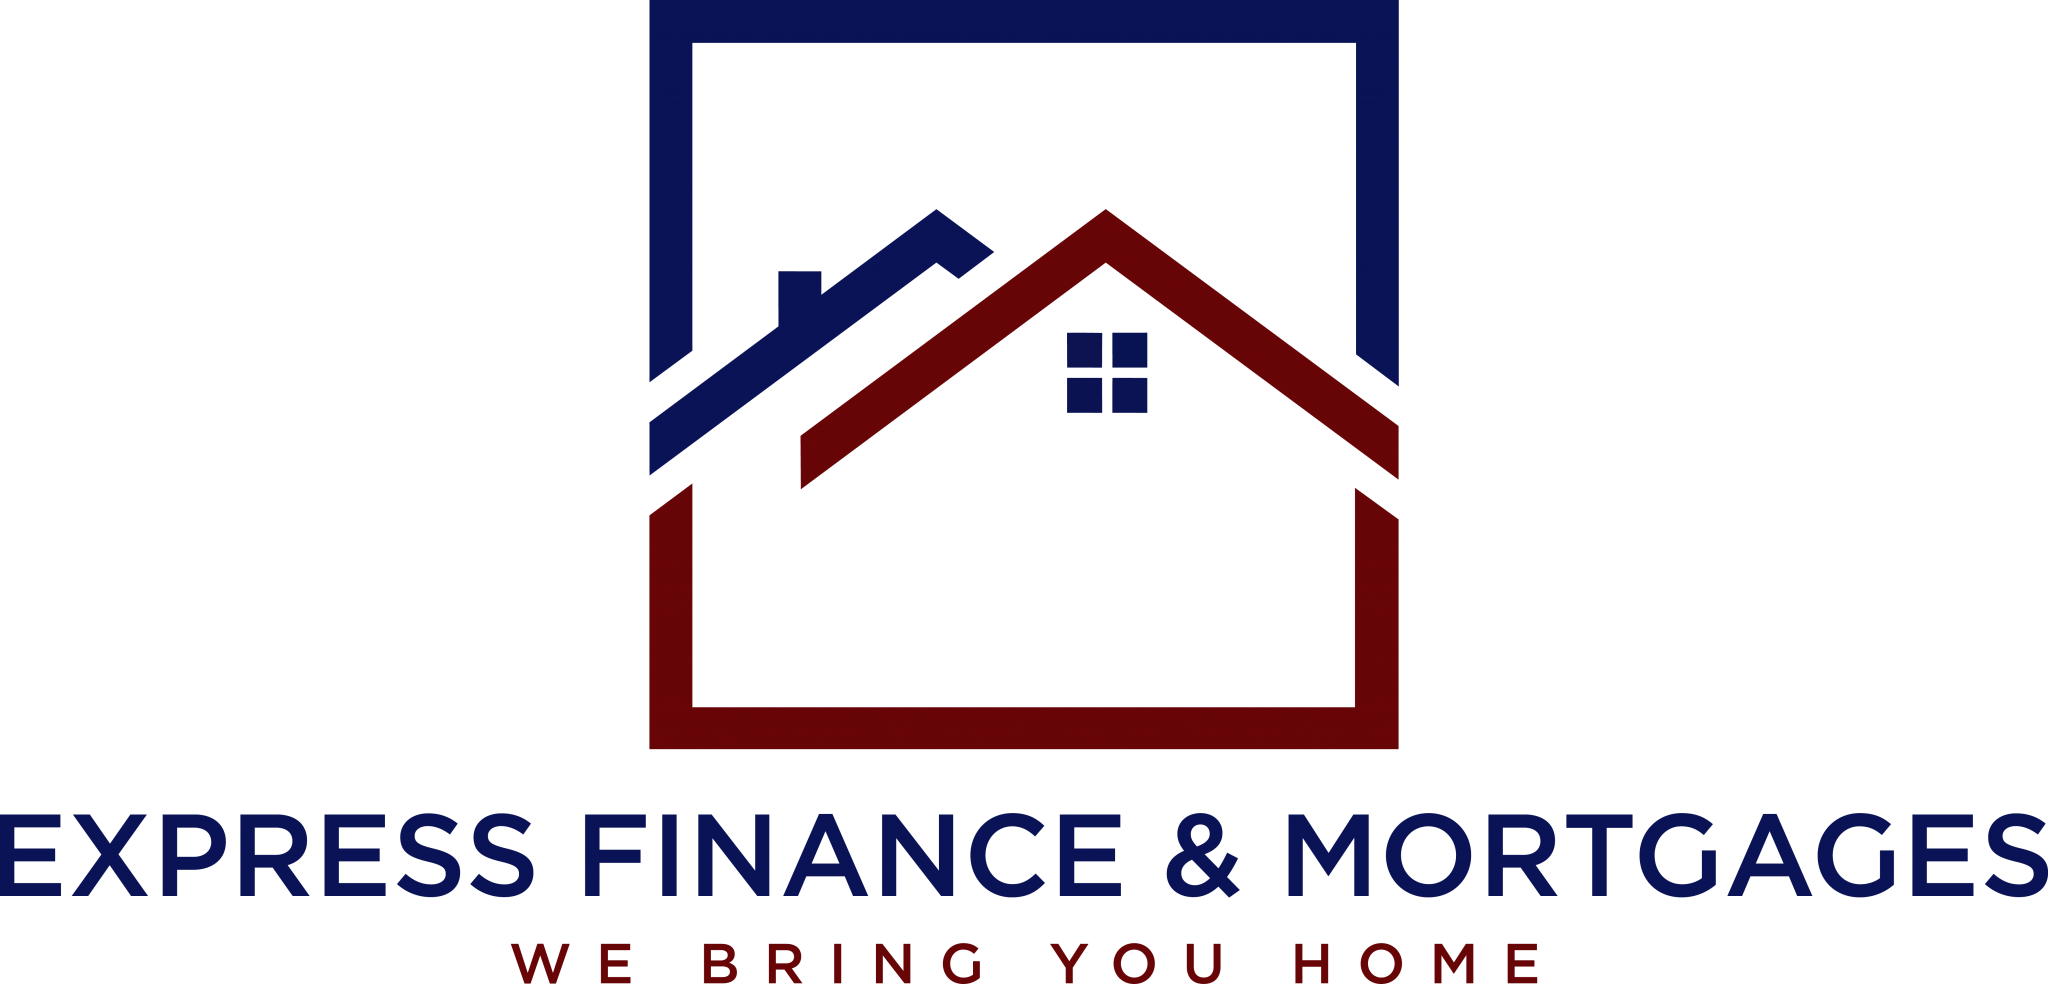 EXPRESS FINANCE & MORTGAGES